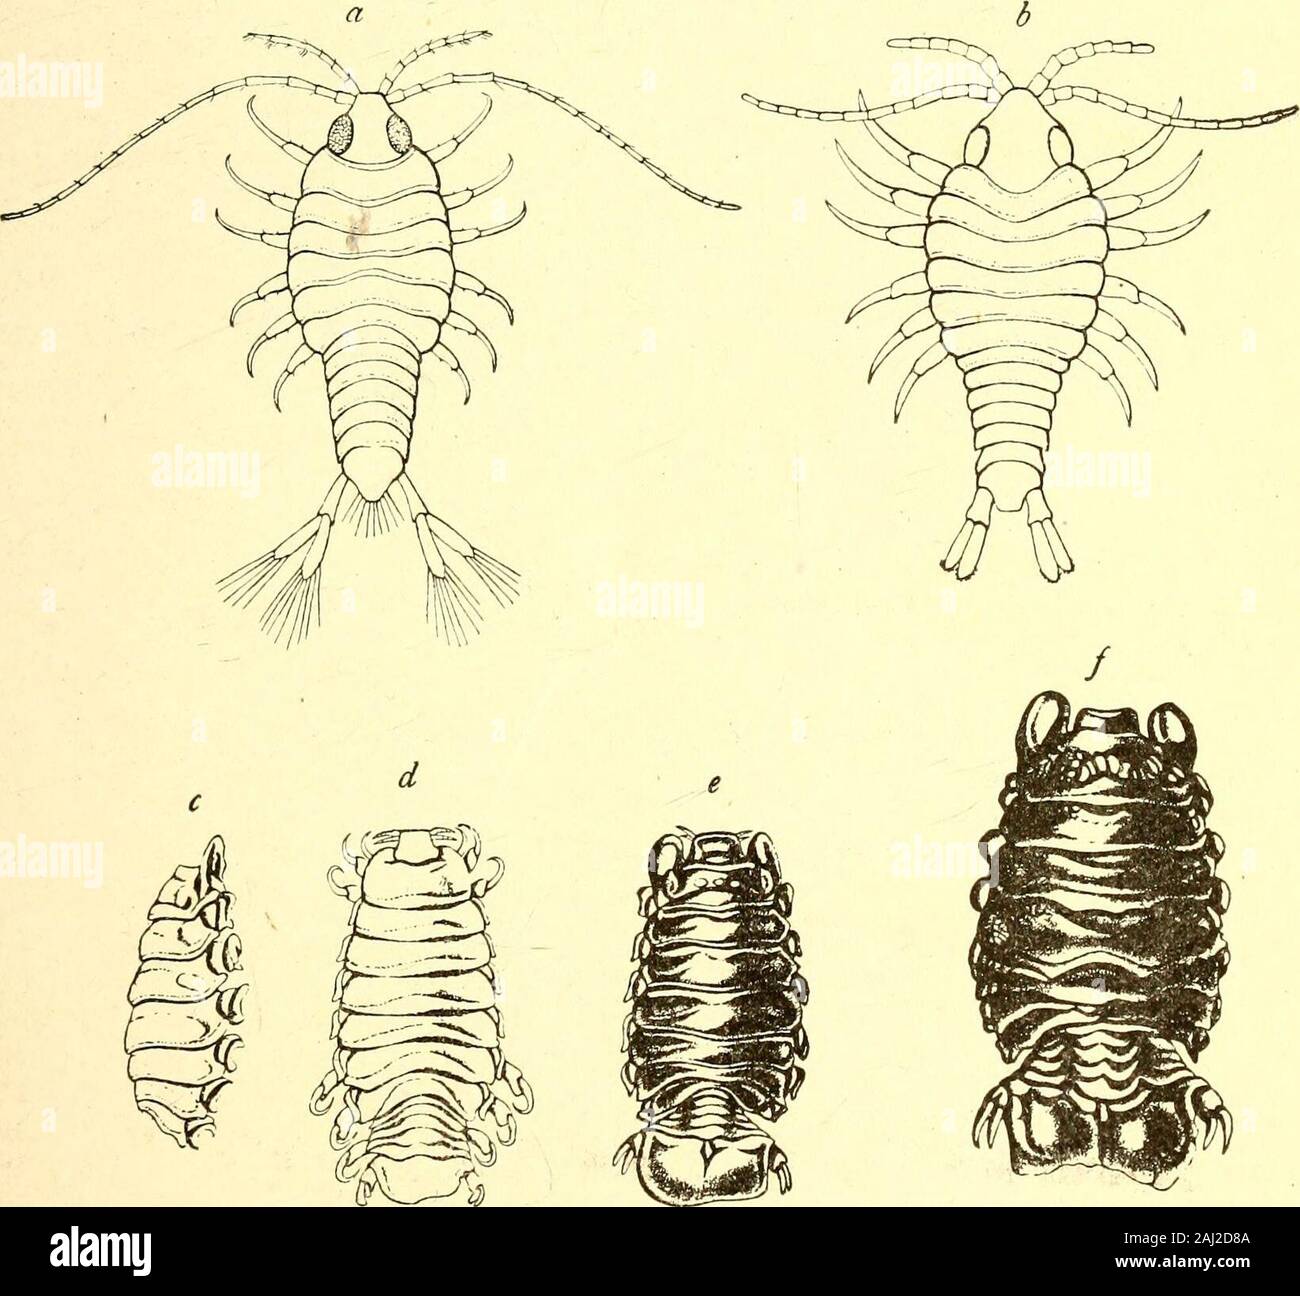 Marine isopods collected in the Philippines by the U.S fisheries steamer Albatross in 1907-08 . tapalo (near Capon),Peru. They were taken from the branchial cavity of Petrolisthesarmatus (Gibbes) which was found in oyster beds. Type-specimen.—Cat. No. 40133, U.S.N.M. ADDITIONAL ISOPODS KNOWN FROM PERU. ANILOCRA L^EVIS Miers. Anilocra L&vis Miers, Proc. Zool. Soc. London, 1877, p. 672, pi. 68, fig. 6.Localities.—Martinique; Peru. CYMOTHOA (ESTRUM (Linnaeus). (?) Oniscus cestrum Linnaeus, Syst. Nat., 12th ed., 1766, p. 1059.—Fabricius,Syst. Ent., 1775, p. 294. Cymothoa cestrum Fabricius, Syst. E Stock Photo